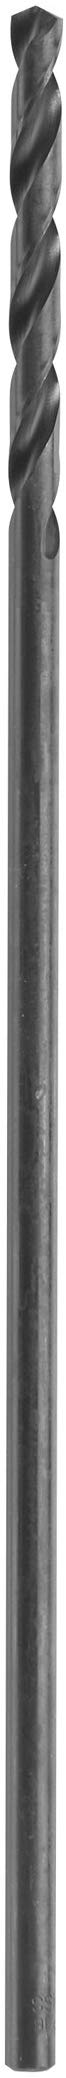 Bosch BL2743 1/4 In. x 6 In. Extra Length Aircraft Black Oxide Drill Bit